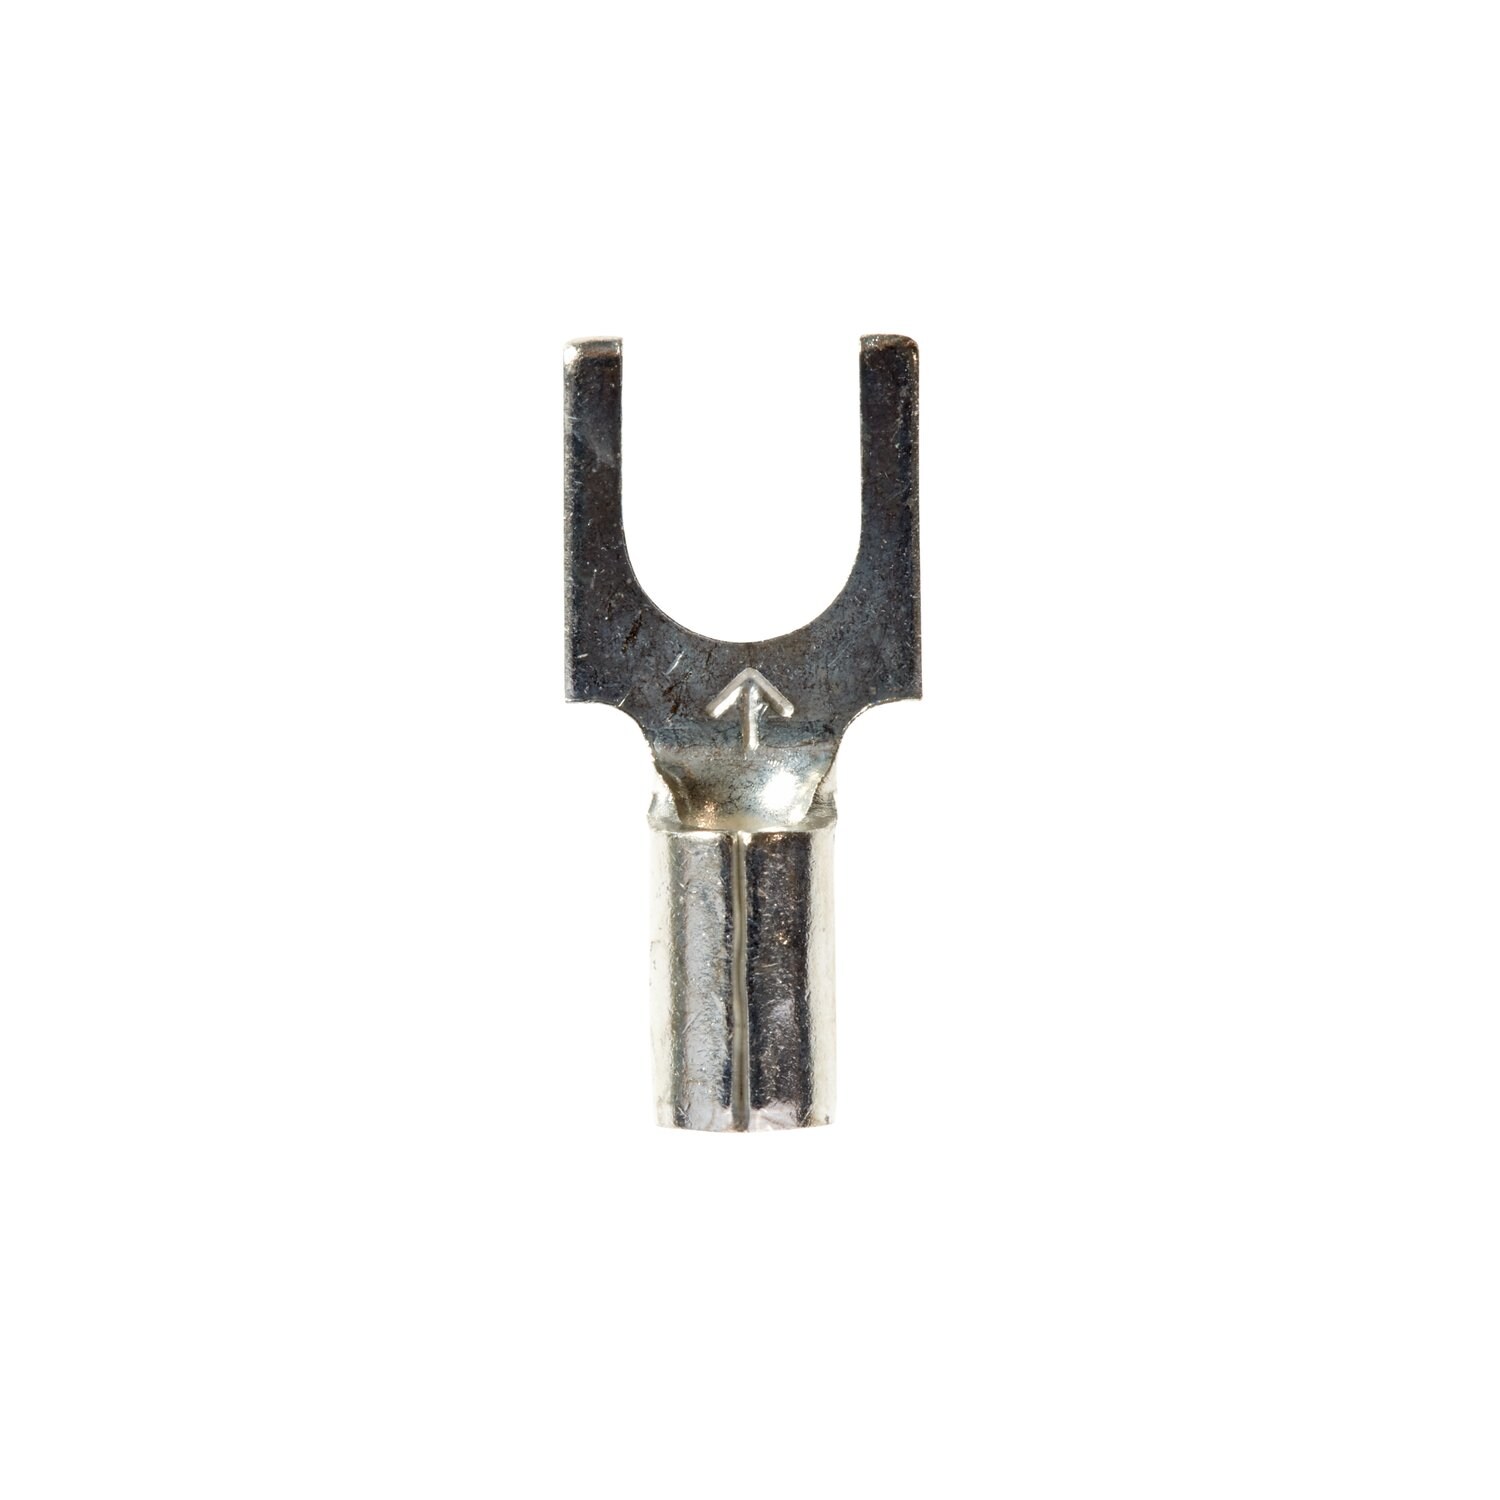 7100164024 - 3M Scotchlok Block Fork, Non-Insulated Butted Seam MU14-10FBK, Stud
Size 10, suitable for use in a terminal block, 1000/Case